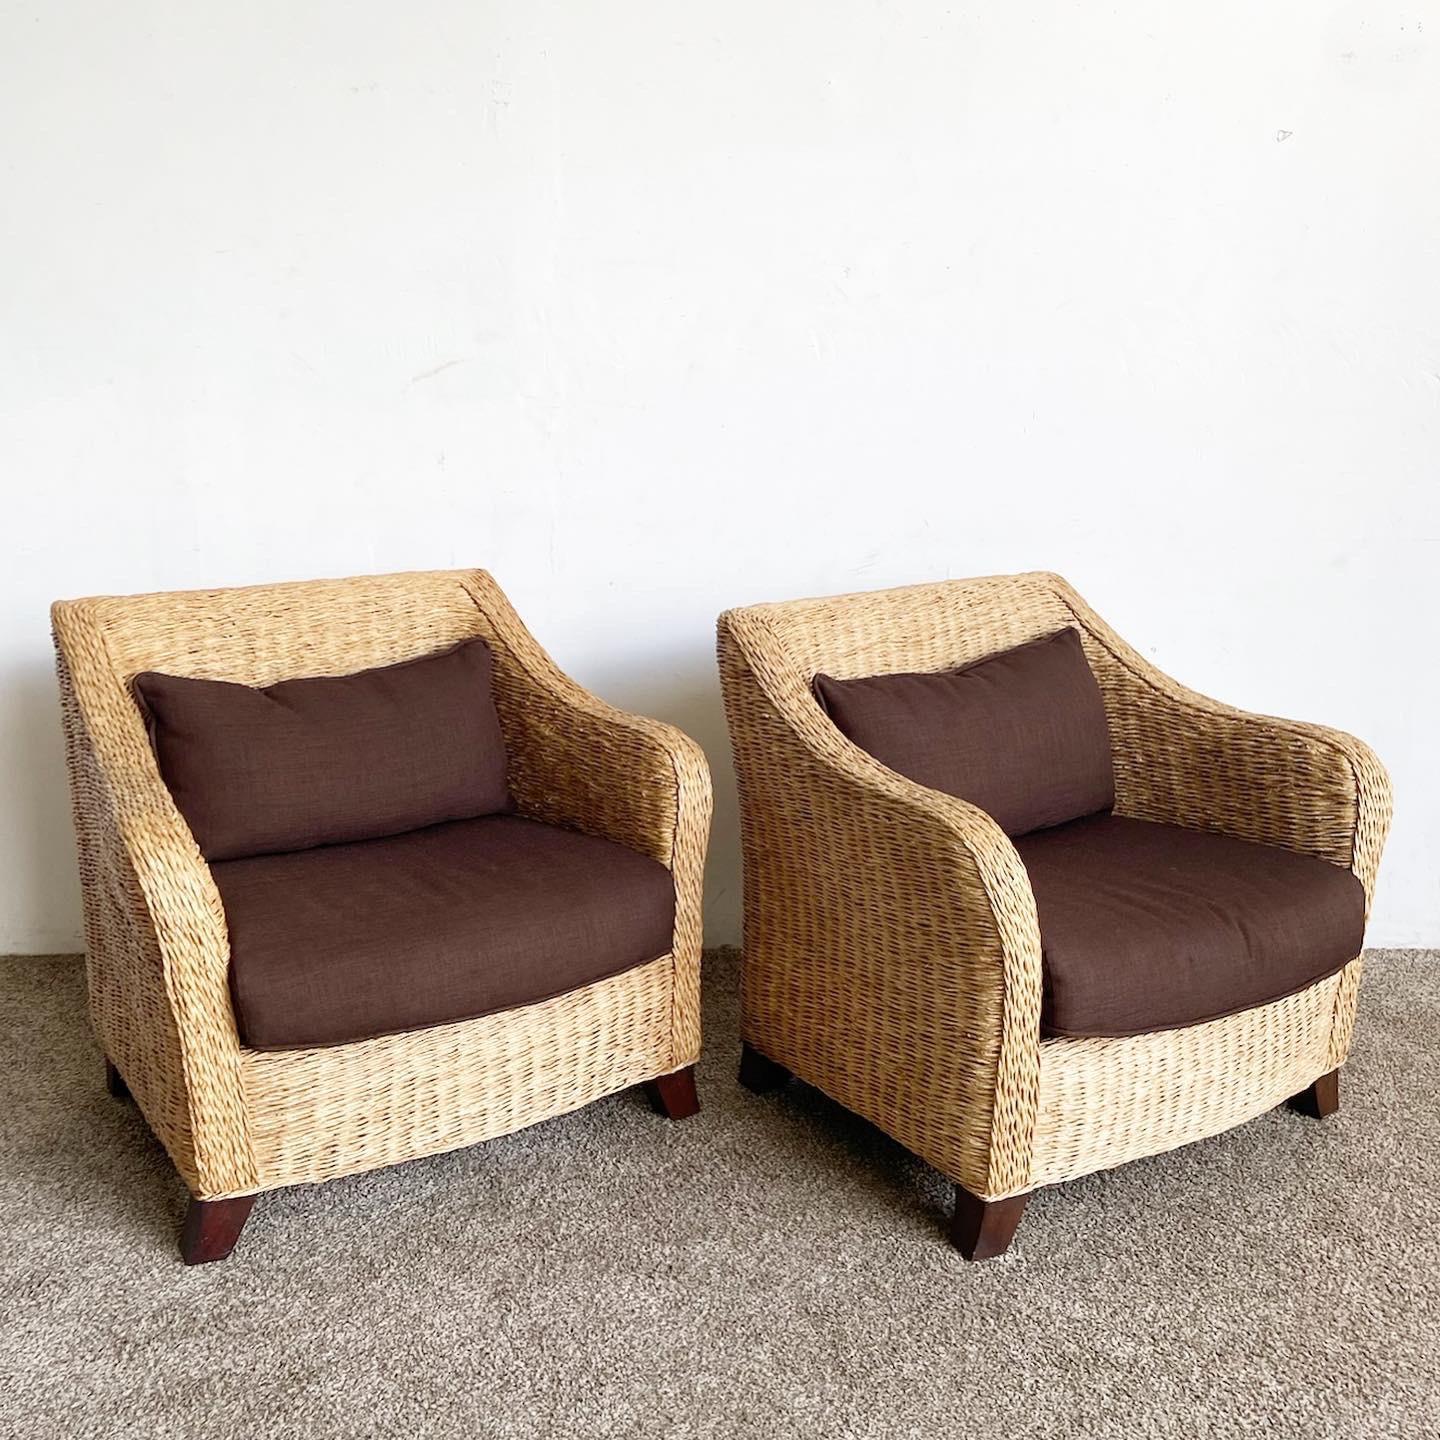 Add a touch of bohemian sophistication with our Boho Chic Wicker Arm Chairs. These handcrafted pieces, with resilient wicker construction and comfortable deep brown cushions, infuse any setting with natural warmth.

Handcrafted wicker construction